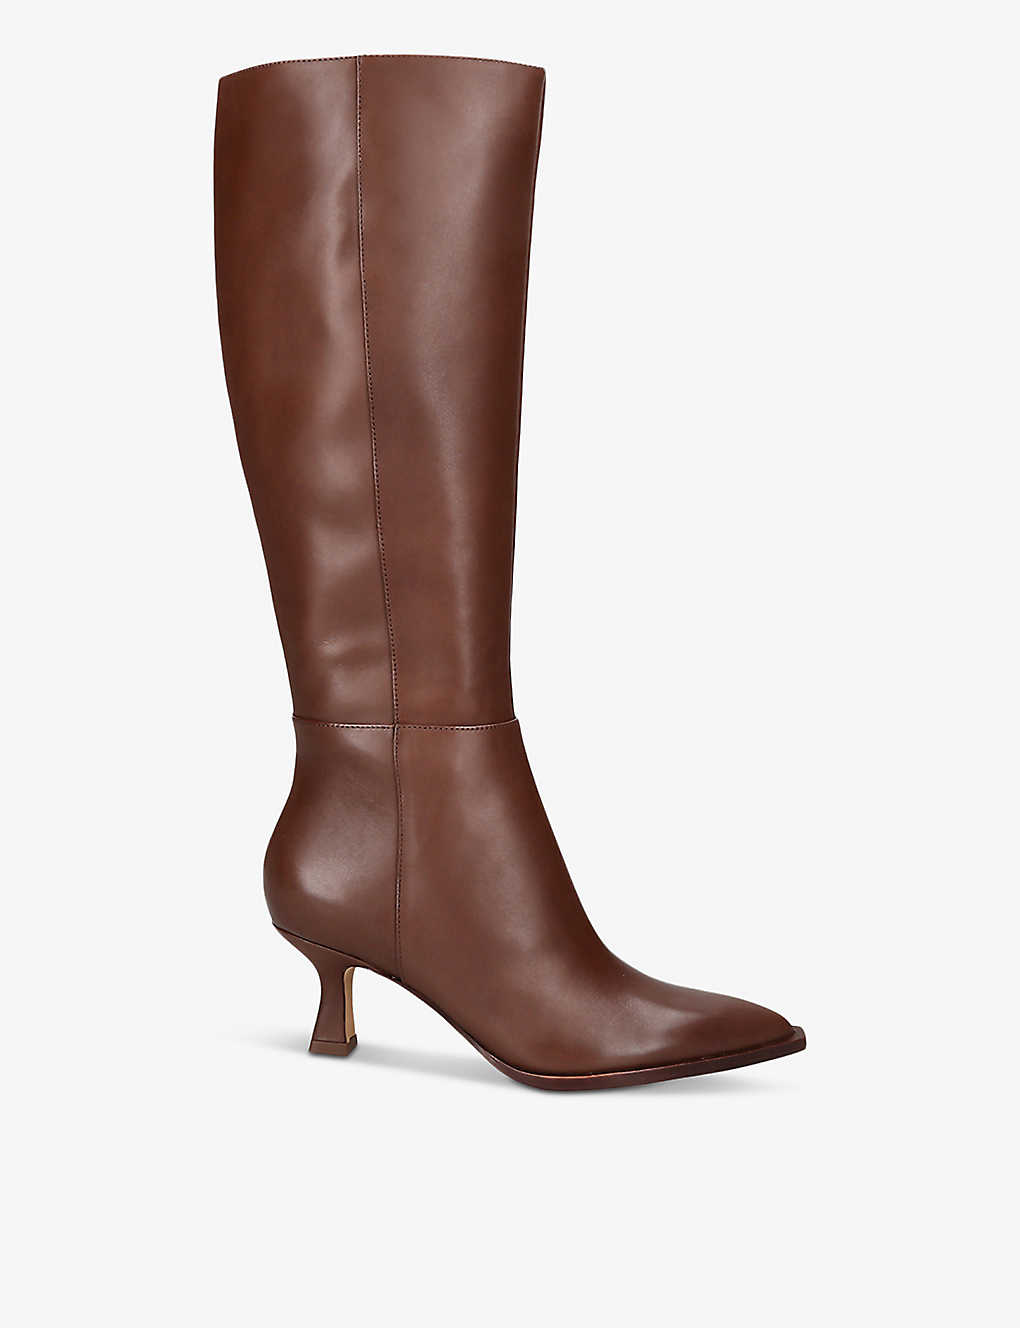 Shop Dolce Vita Women's Brown Auggie Leather Heeled Knee-high Boots